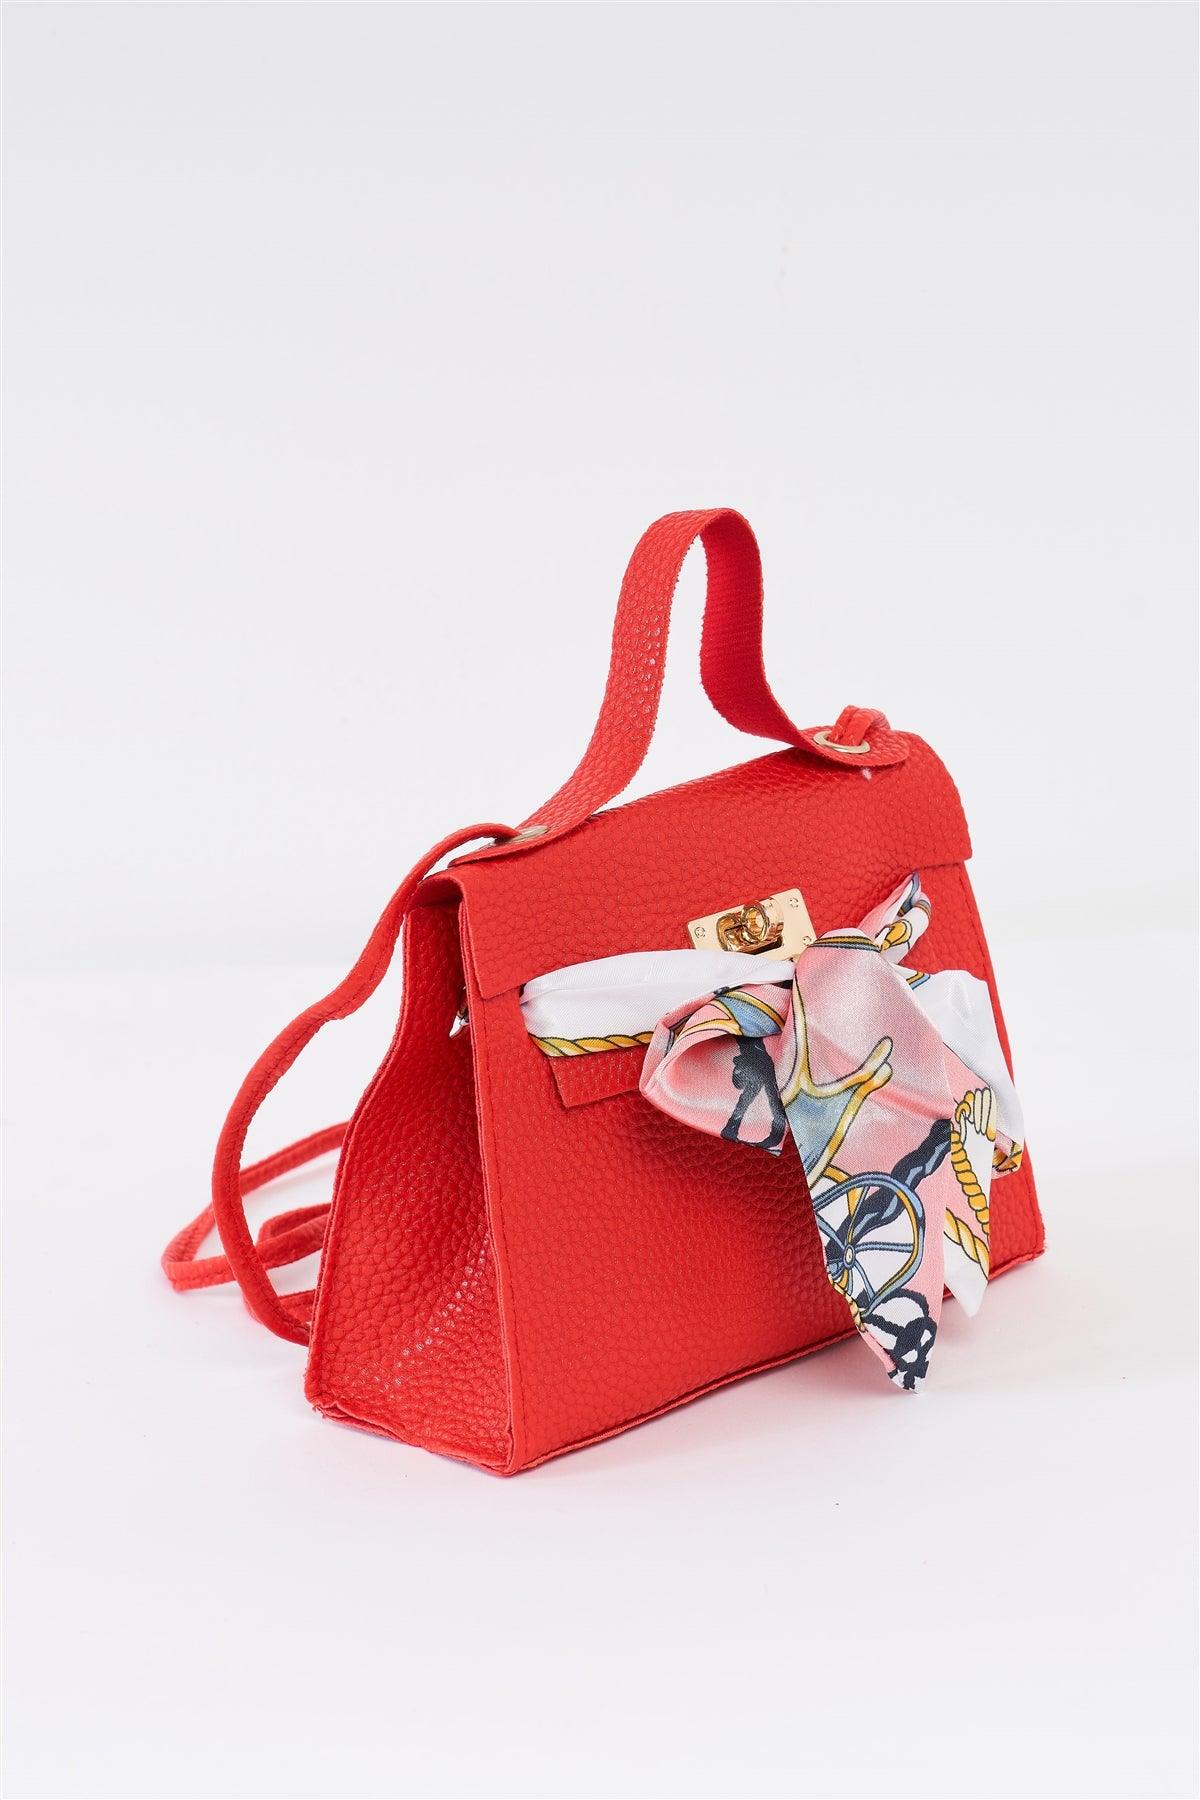 Red Textured Pleather Satin Printed Twilly Scarf Detail Flap Satchel Handbag /3 Bags